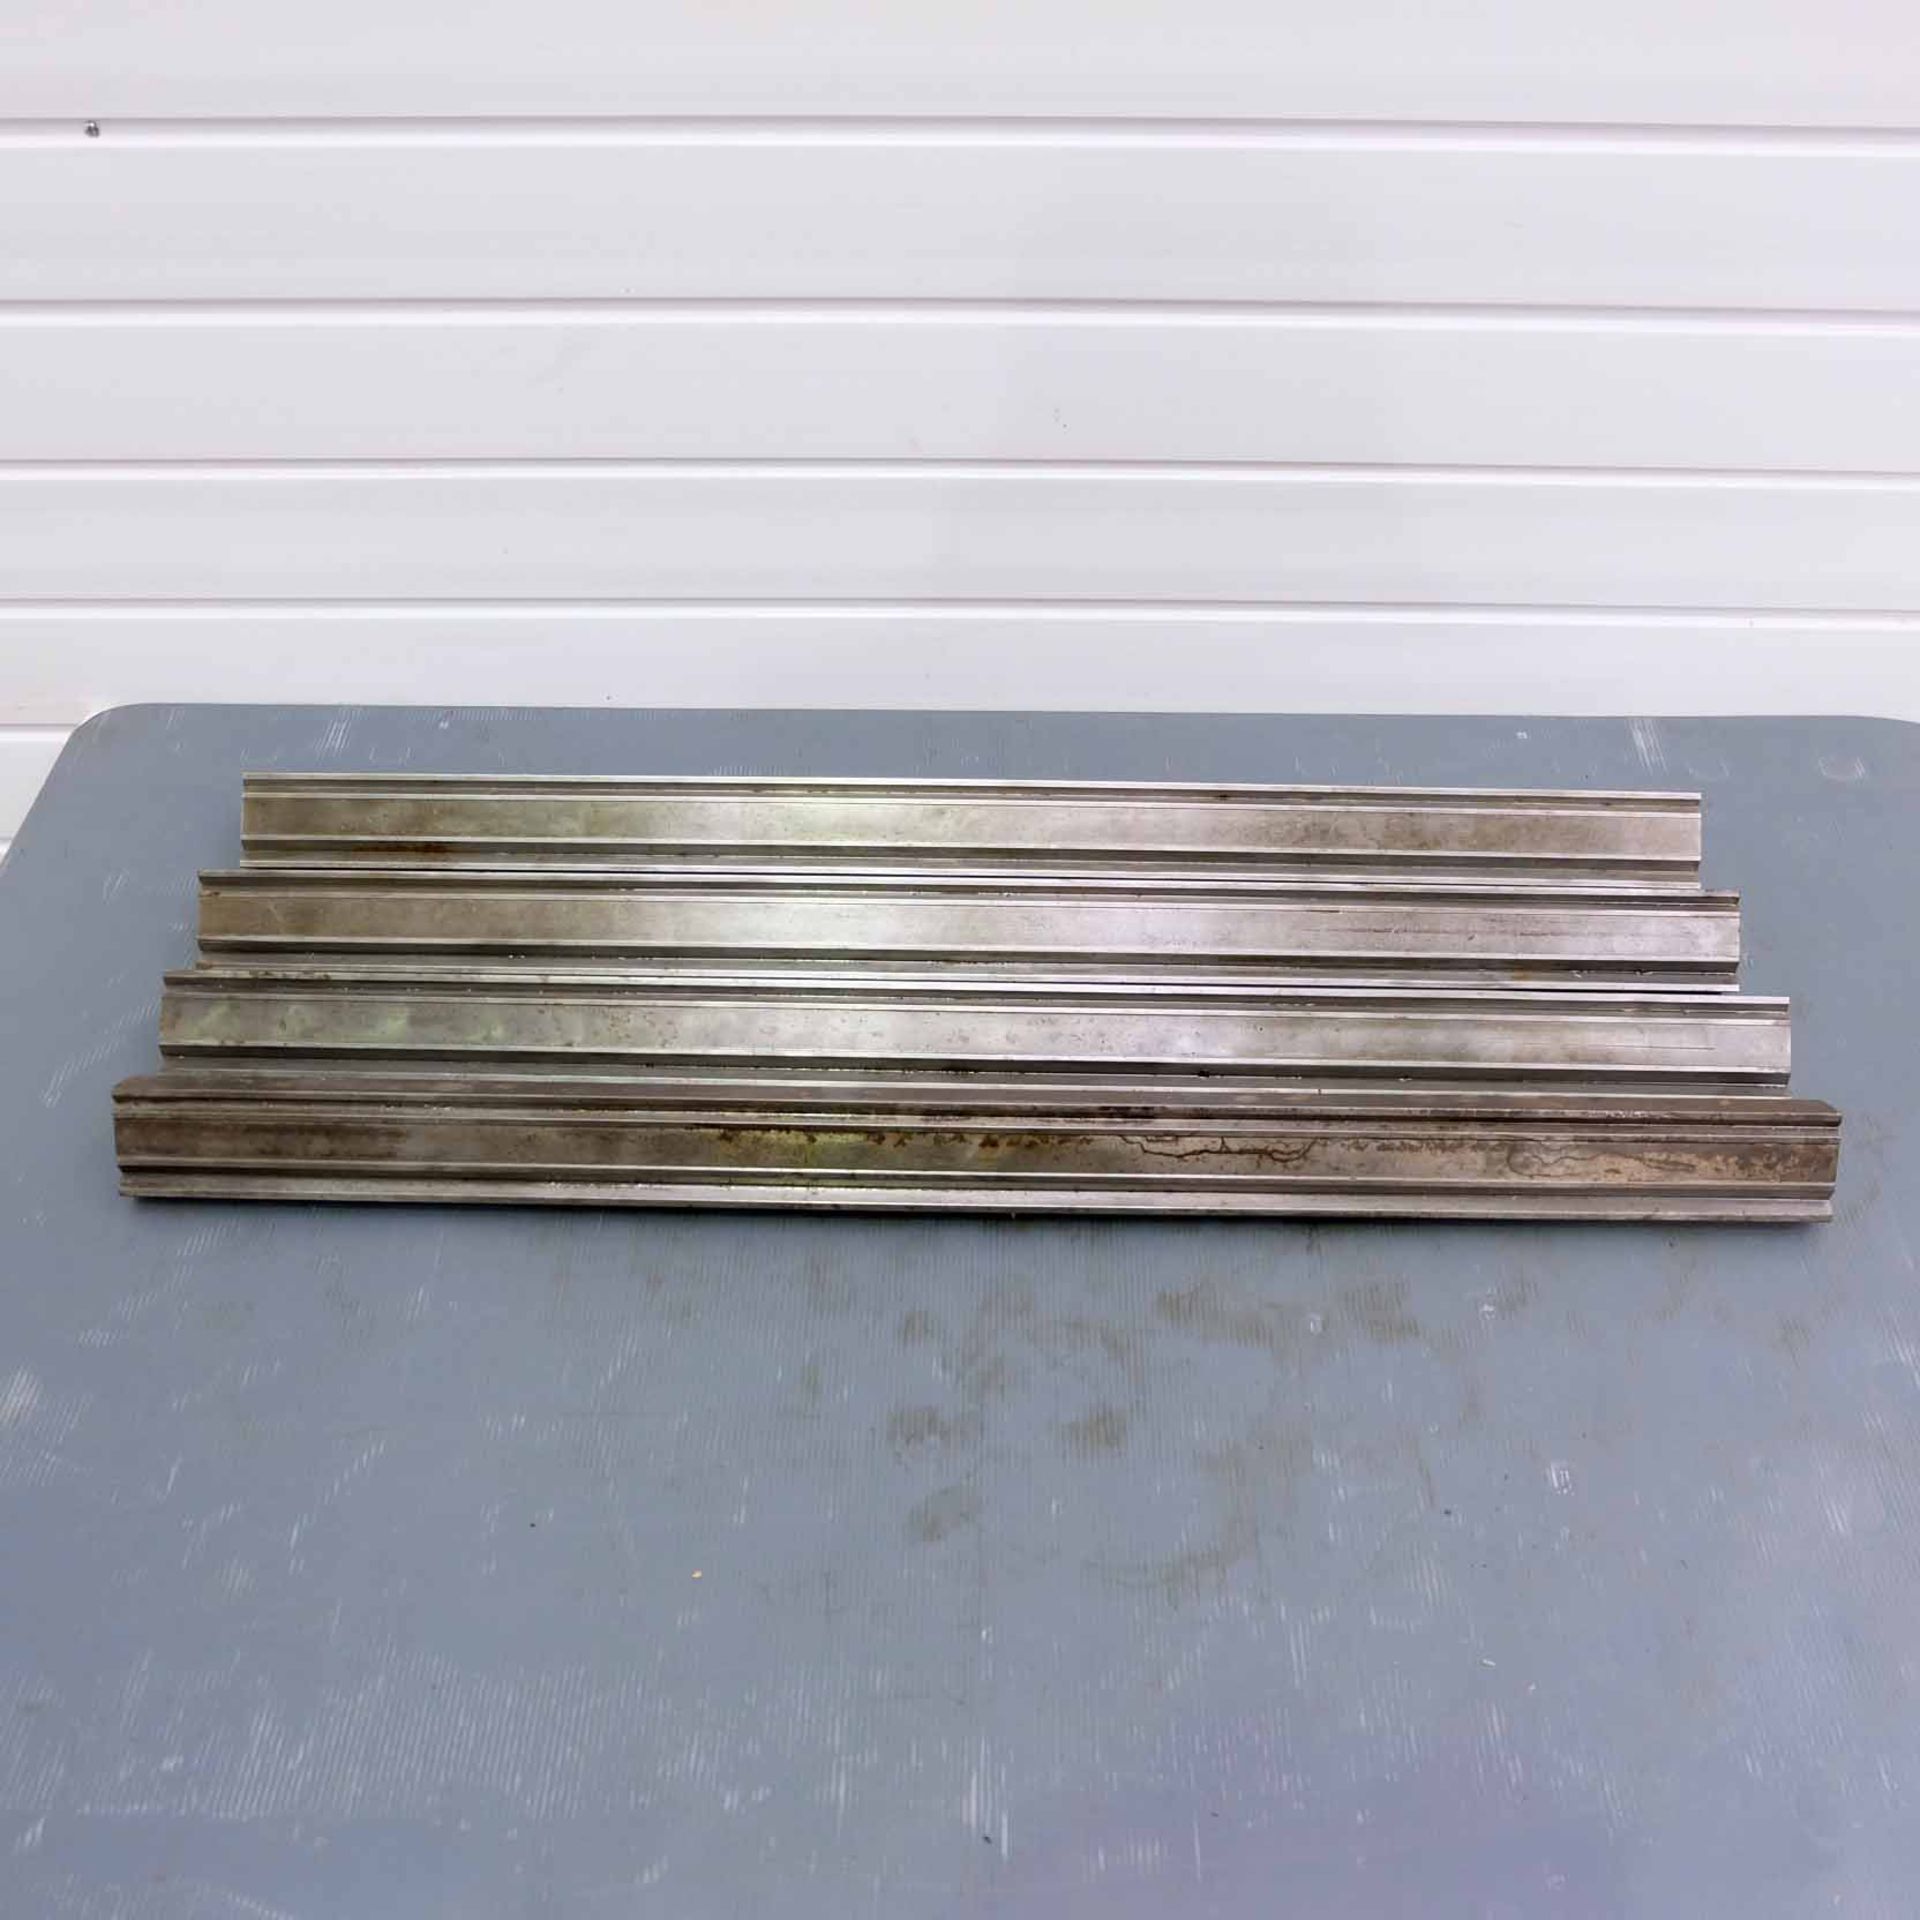 4 x Lengths of Bottom Press Brake Tooling. Double Vee. 4 x 835mm Long. With Clamping Fittings.